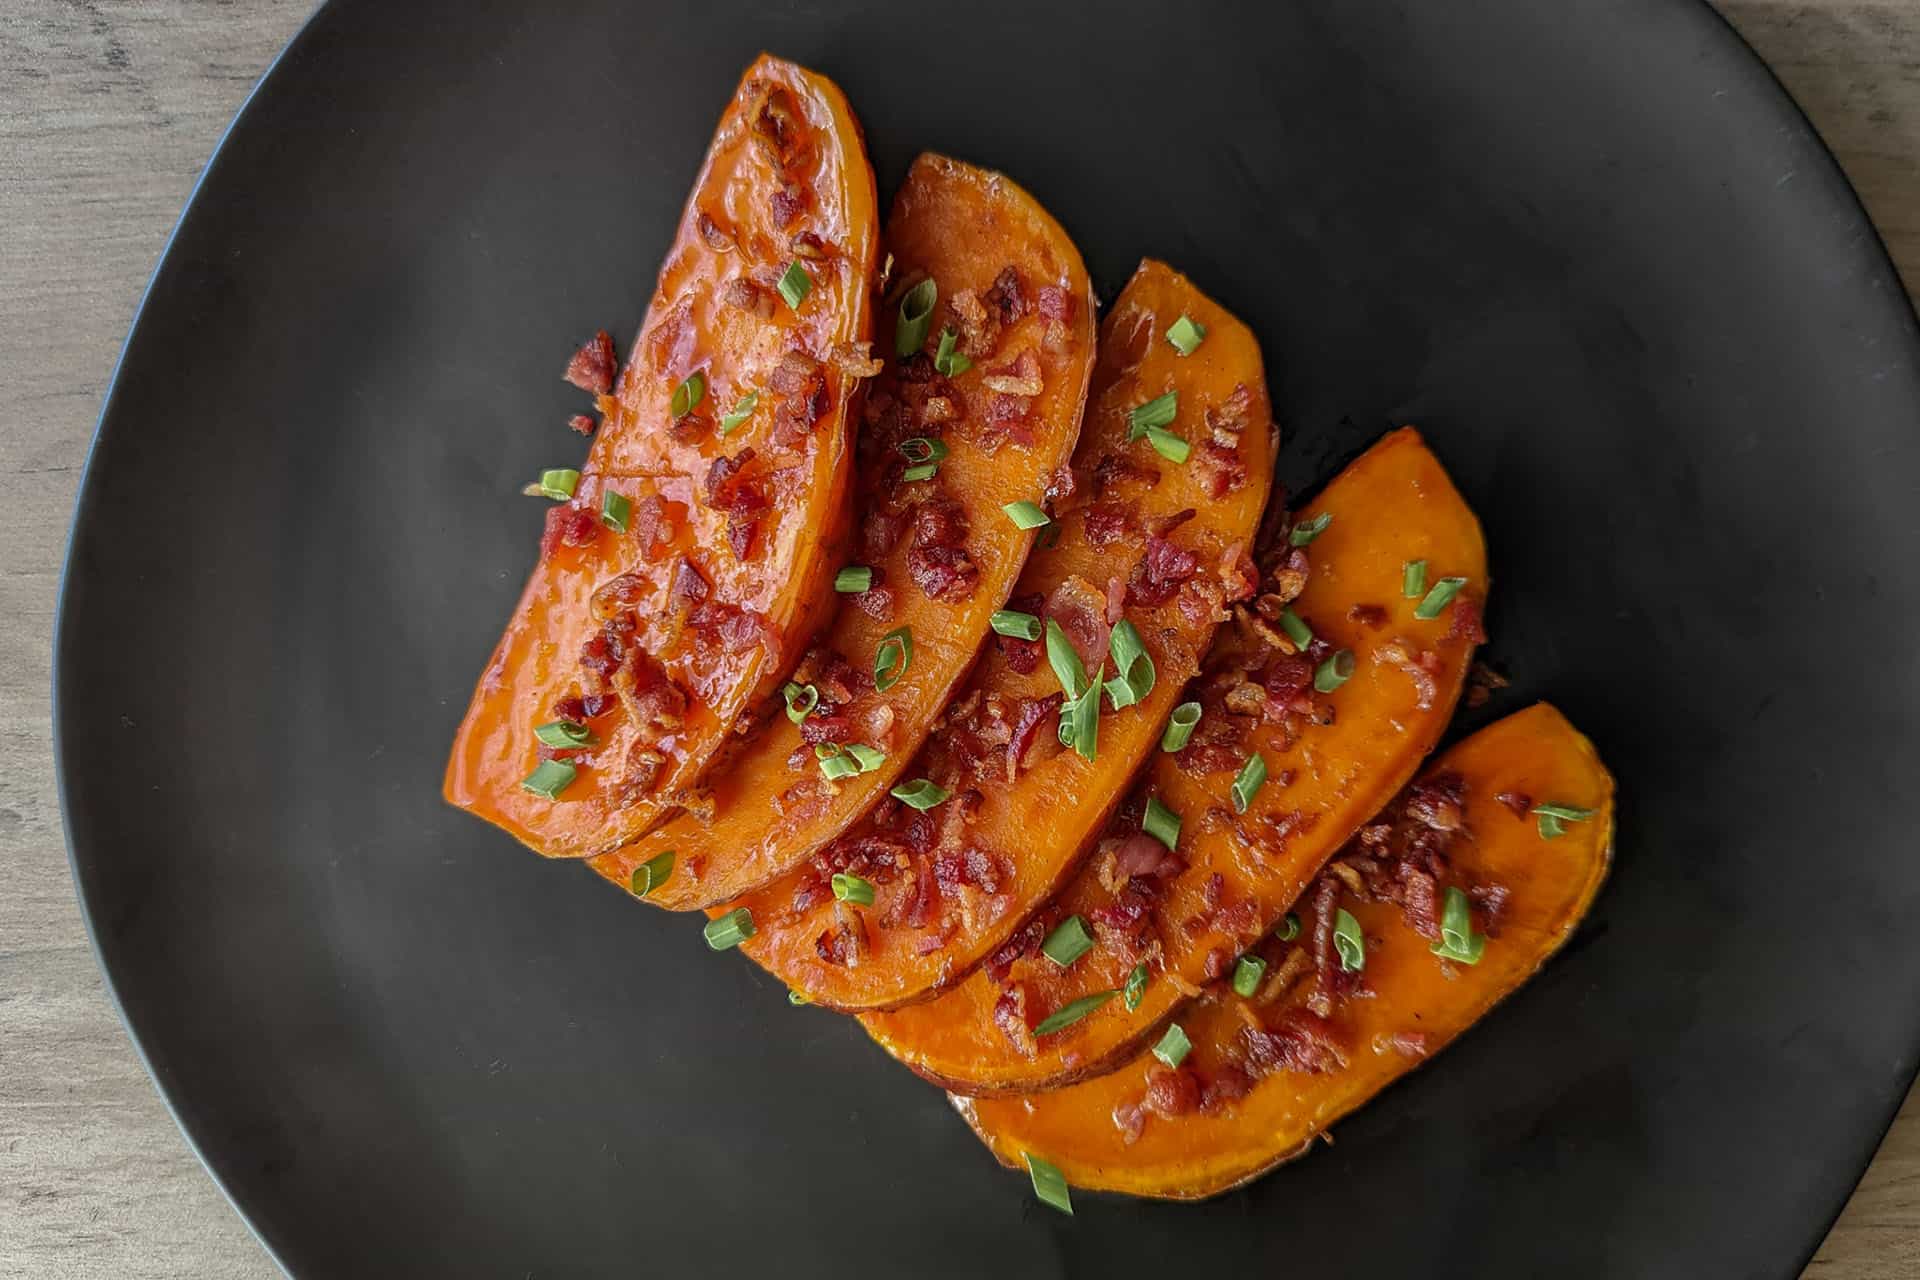 Wedges of maple glazed sweet potato topped with bacon and chives